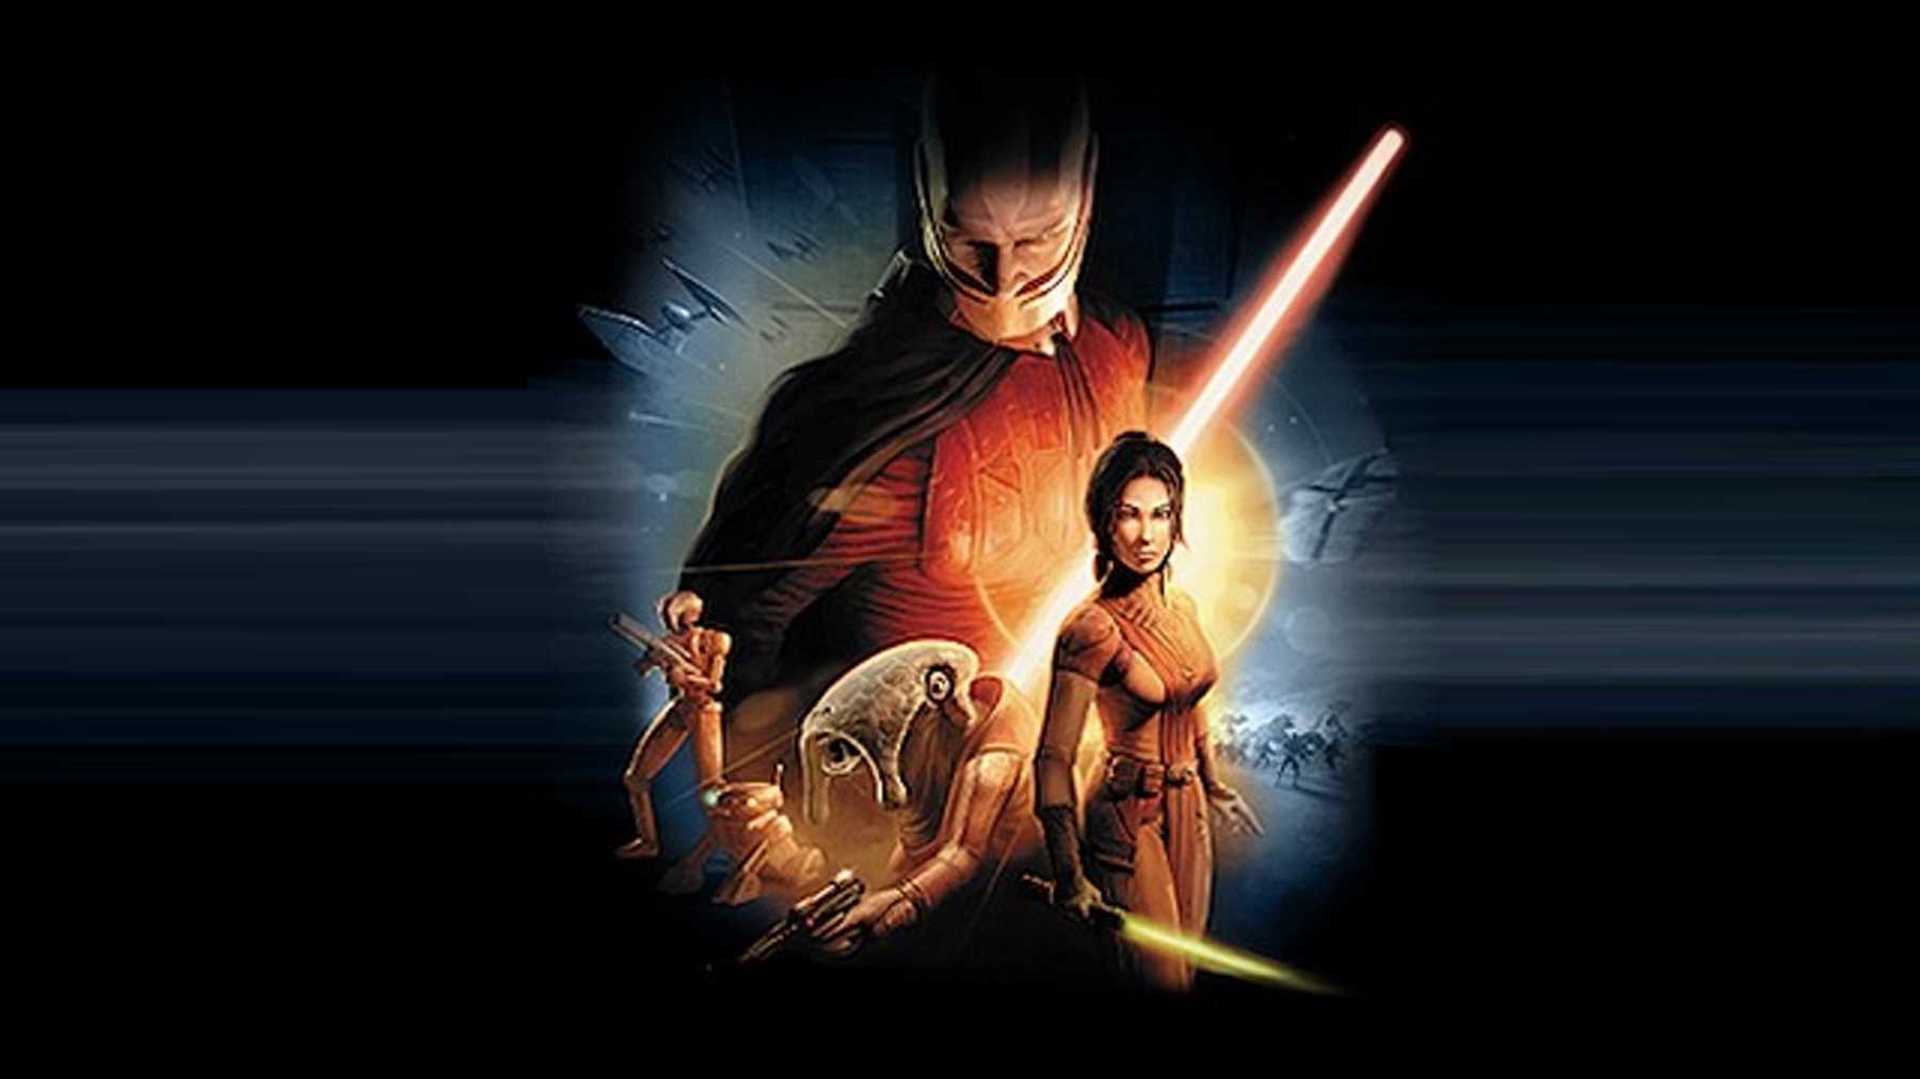 star wars knights of the old republic storyline